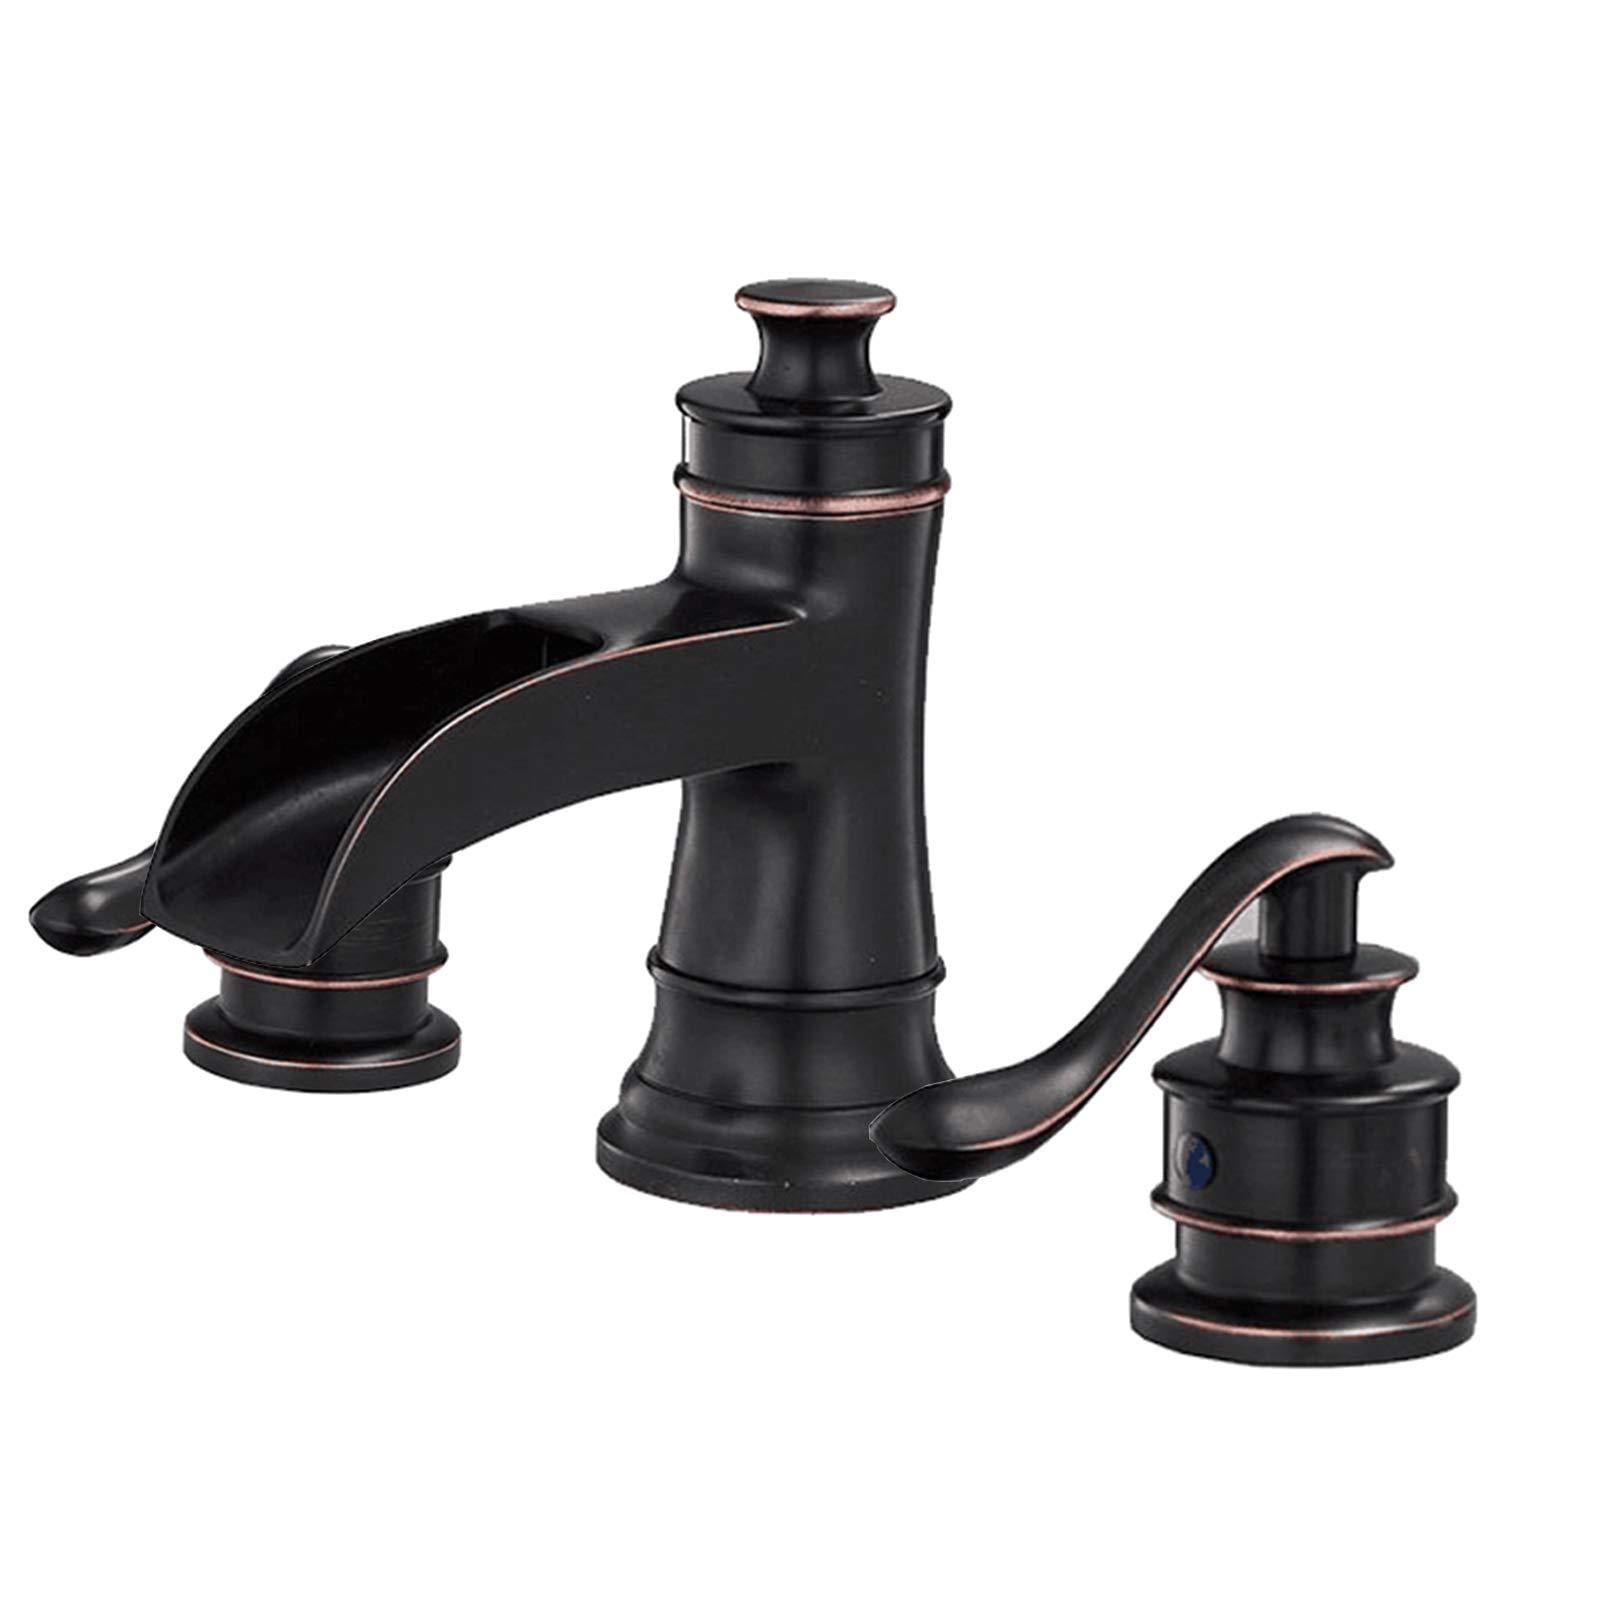 Bathlavish Oil Rubbed Bronze Widespread Bathroom Faucet 3 Hole Waterfall 8  - 16 Inch 2 Handle Vanity Lavatory Commercial Supply Line Lead-Free Without  